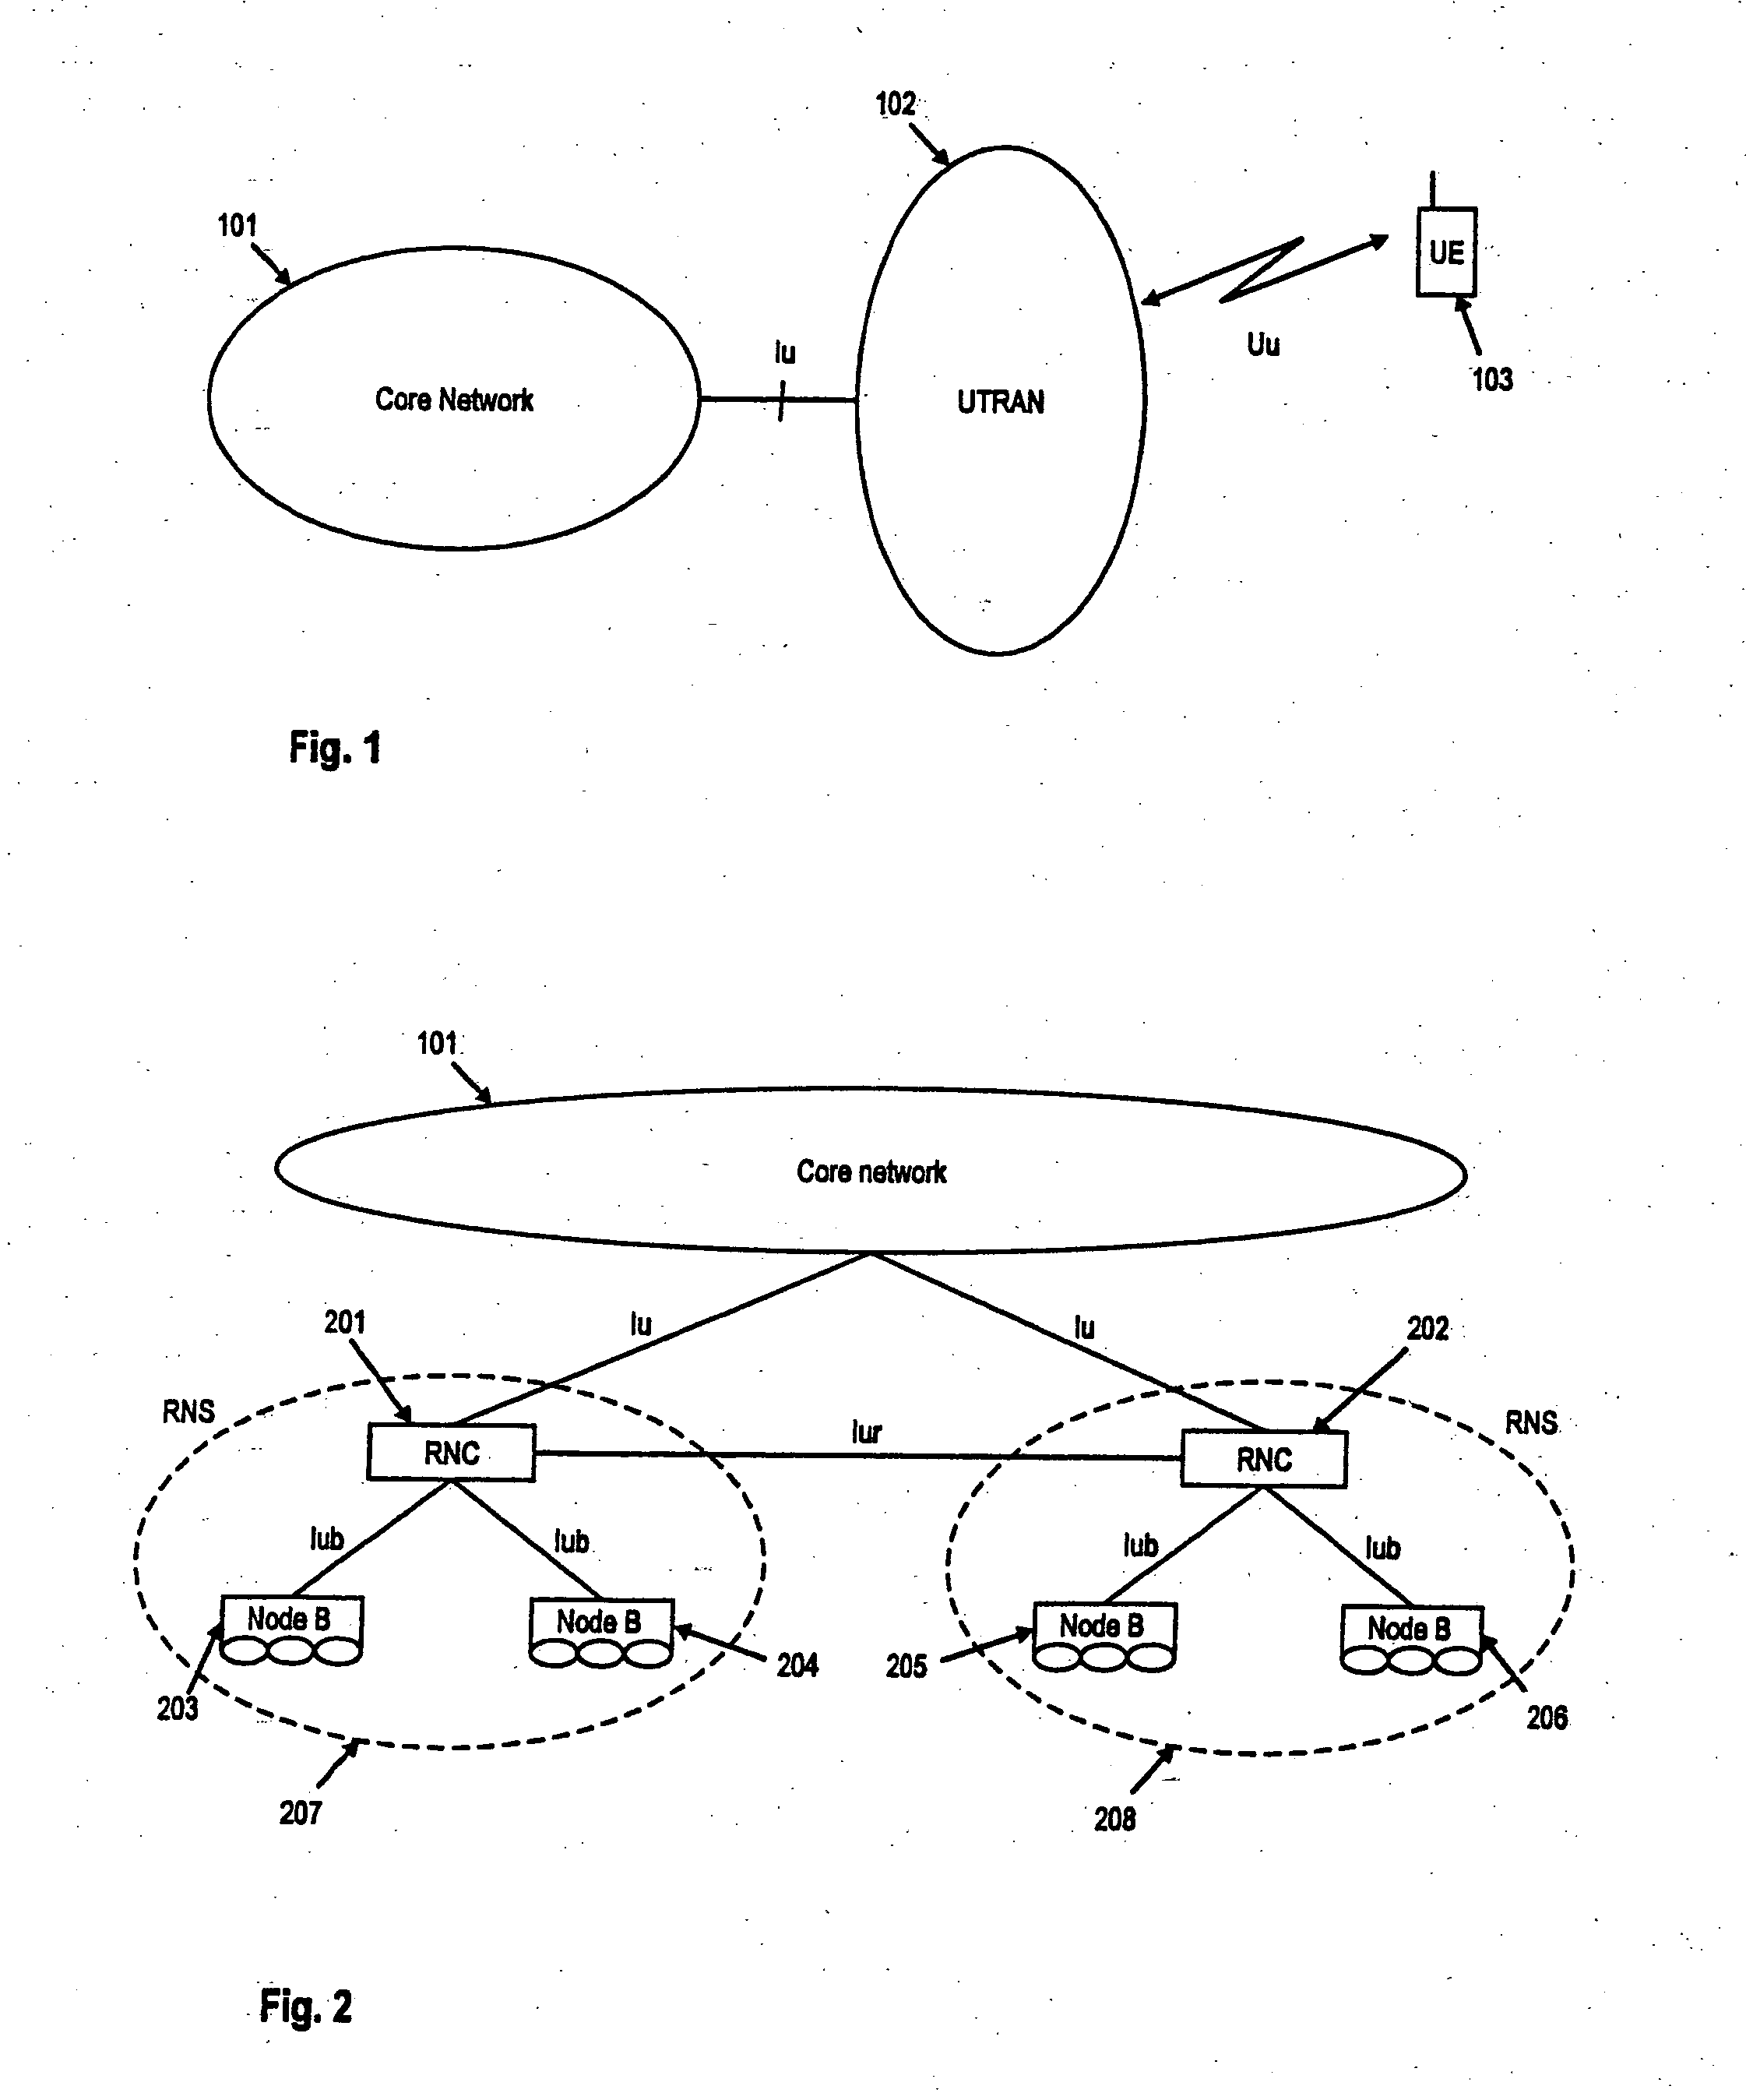 MAC layer reconfiguration in a mobile communication system